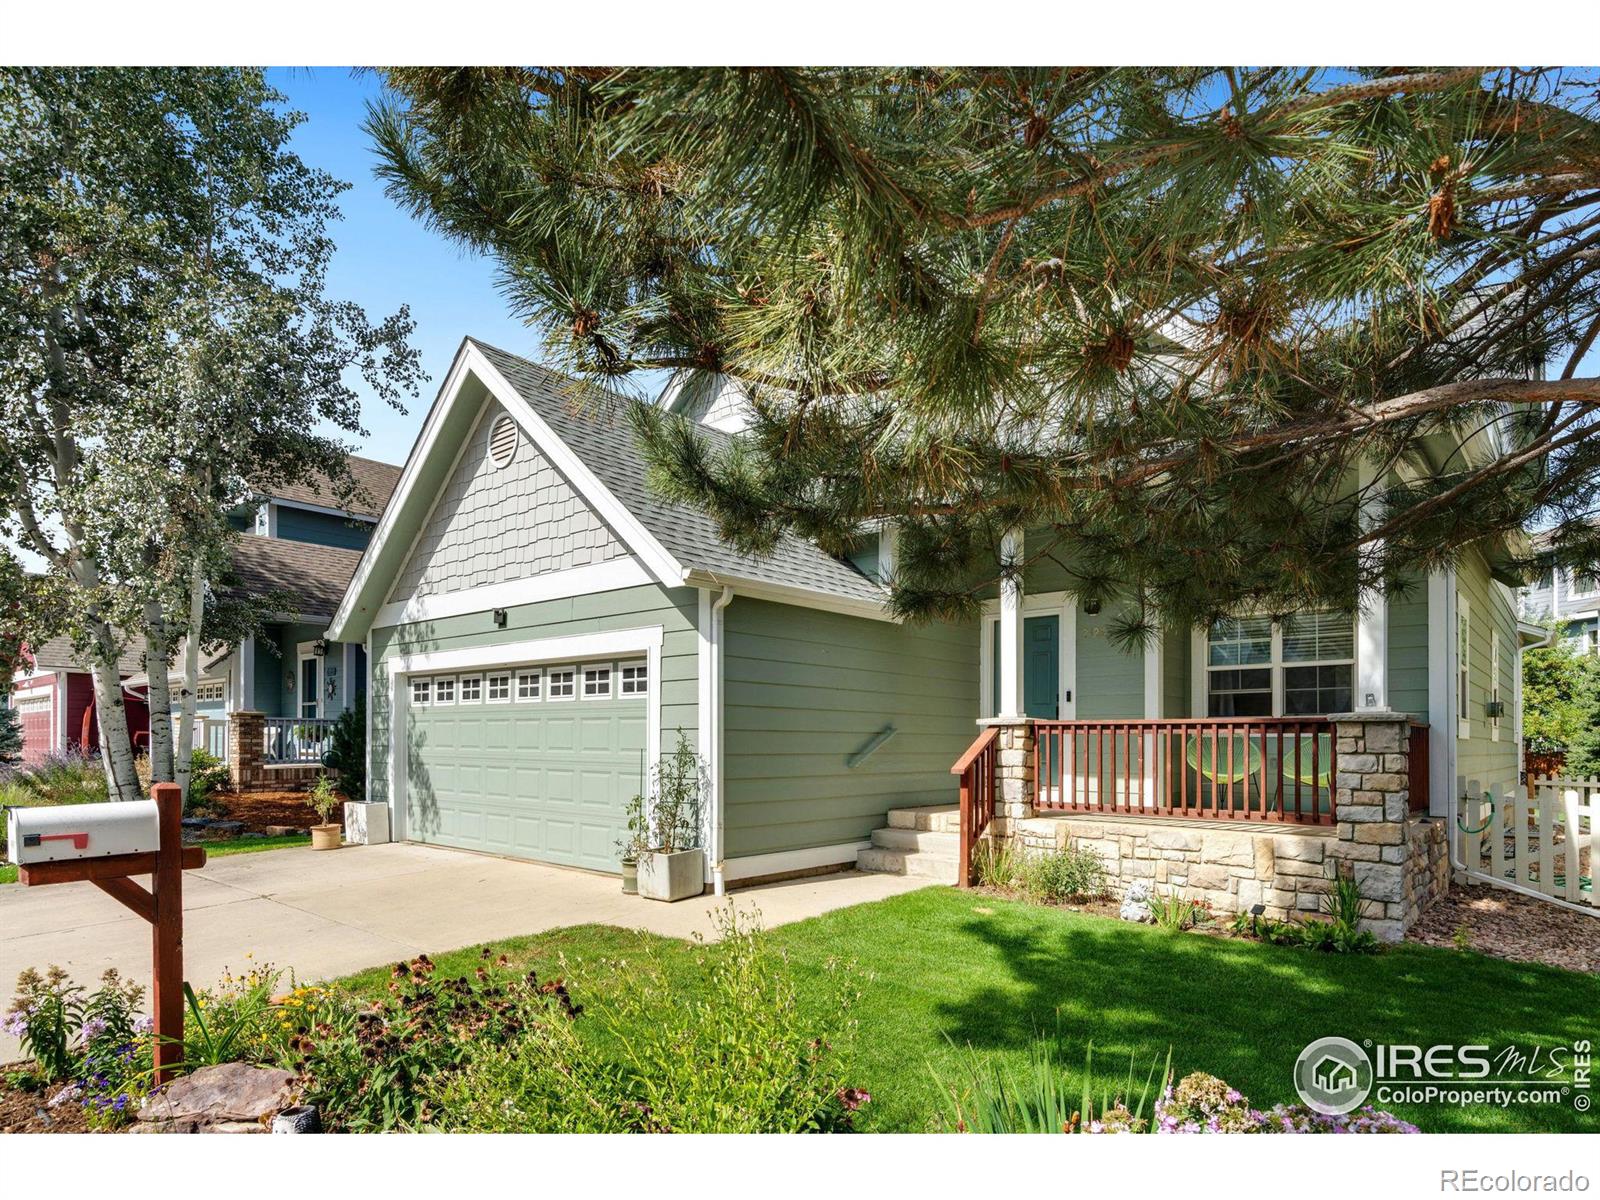 Report Image for 2326  Watersong Circle,Longmont, Colorado